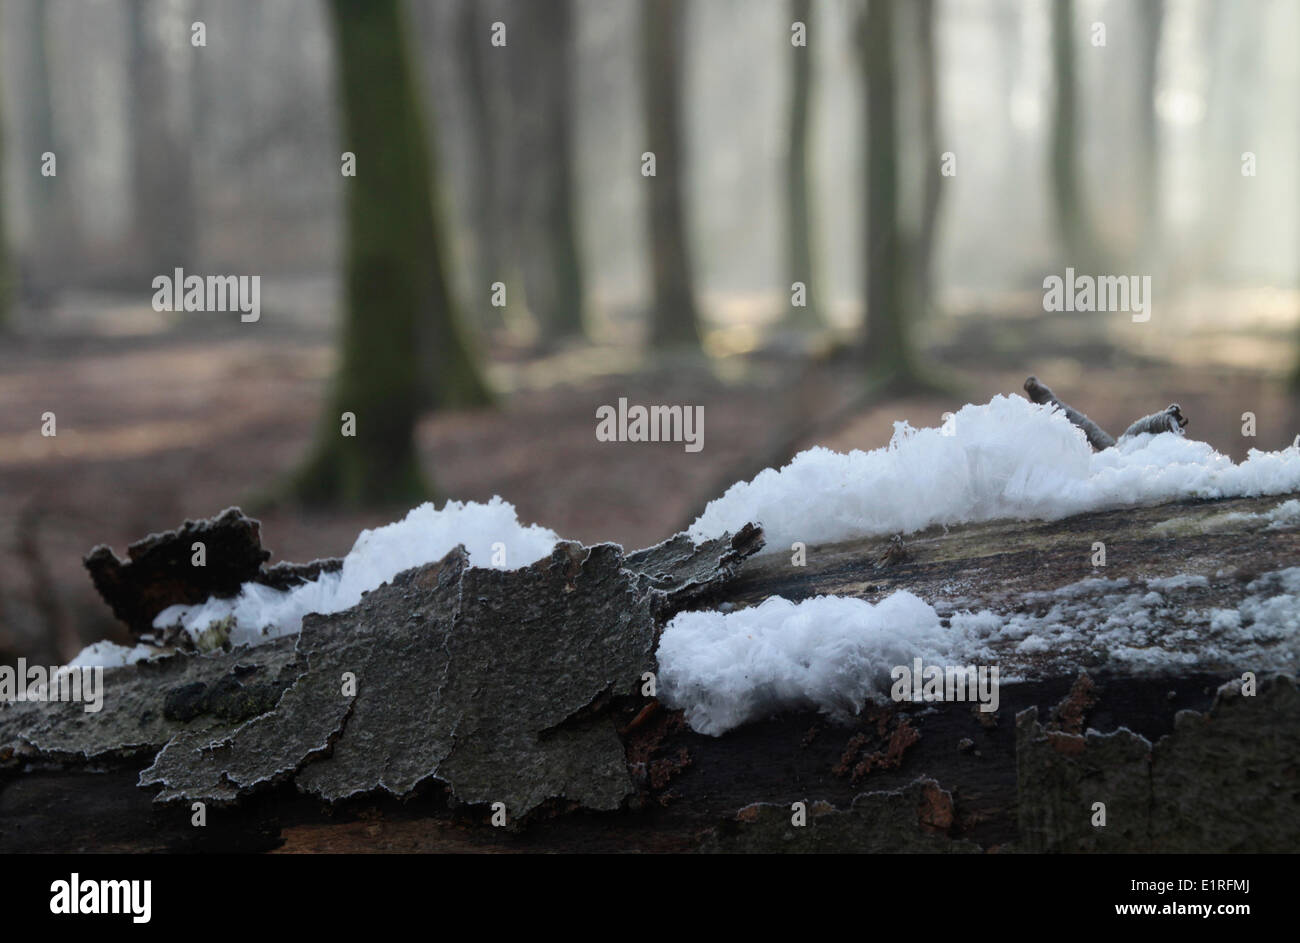 Icehair is caused by an active fungi inside a dead branch at frost and a high humidity. Stock Photo